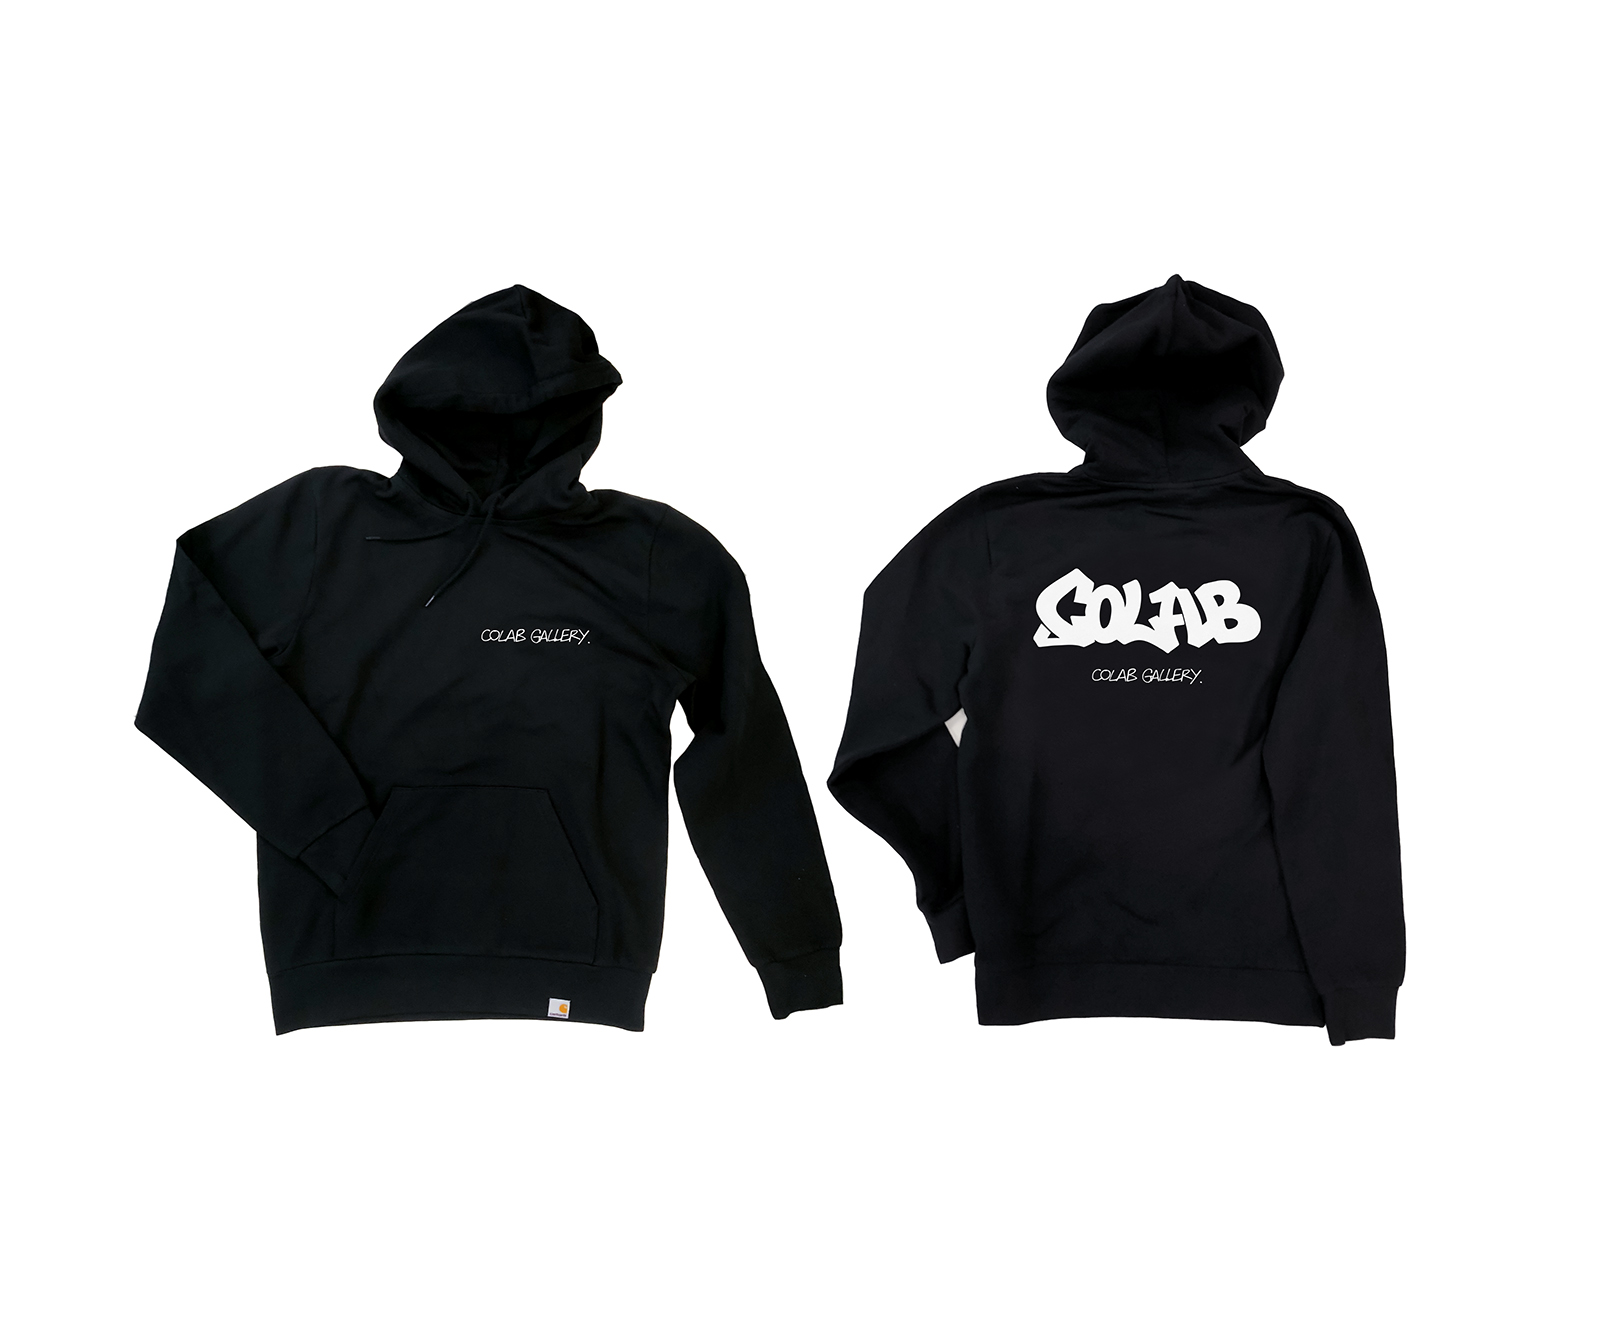 Colab Gallery - Lugosis Hoodie, SIZE XXL